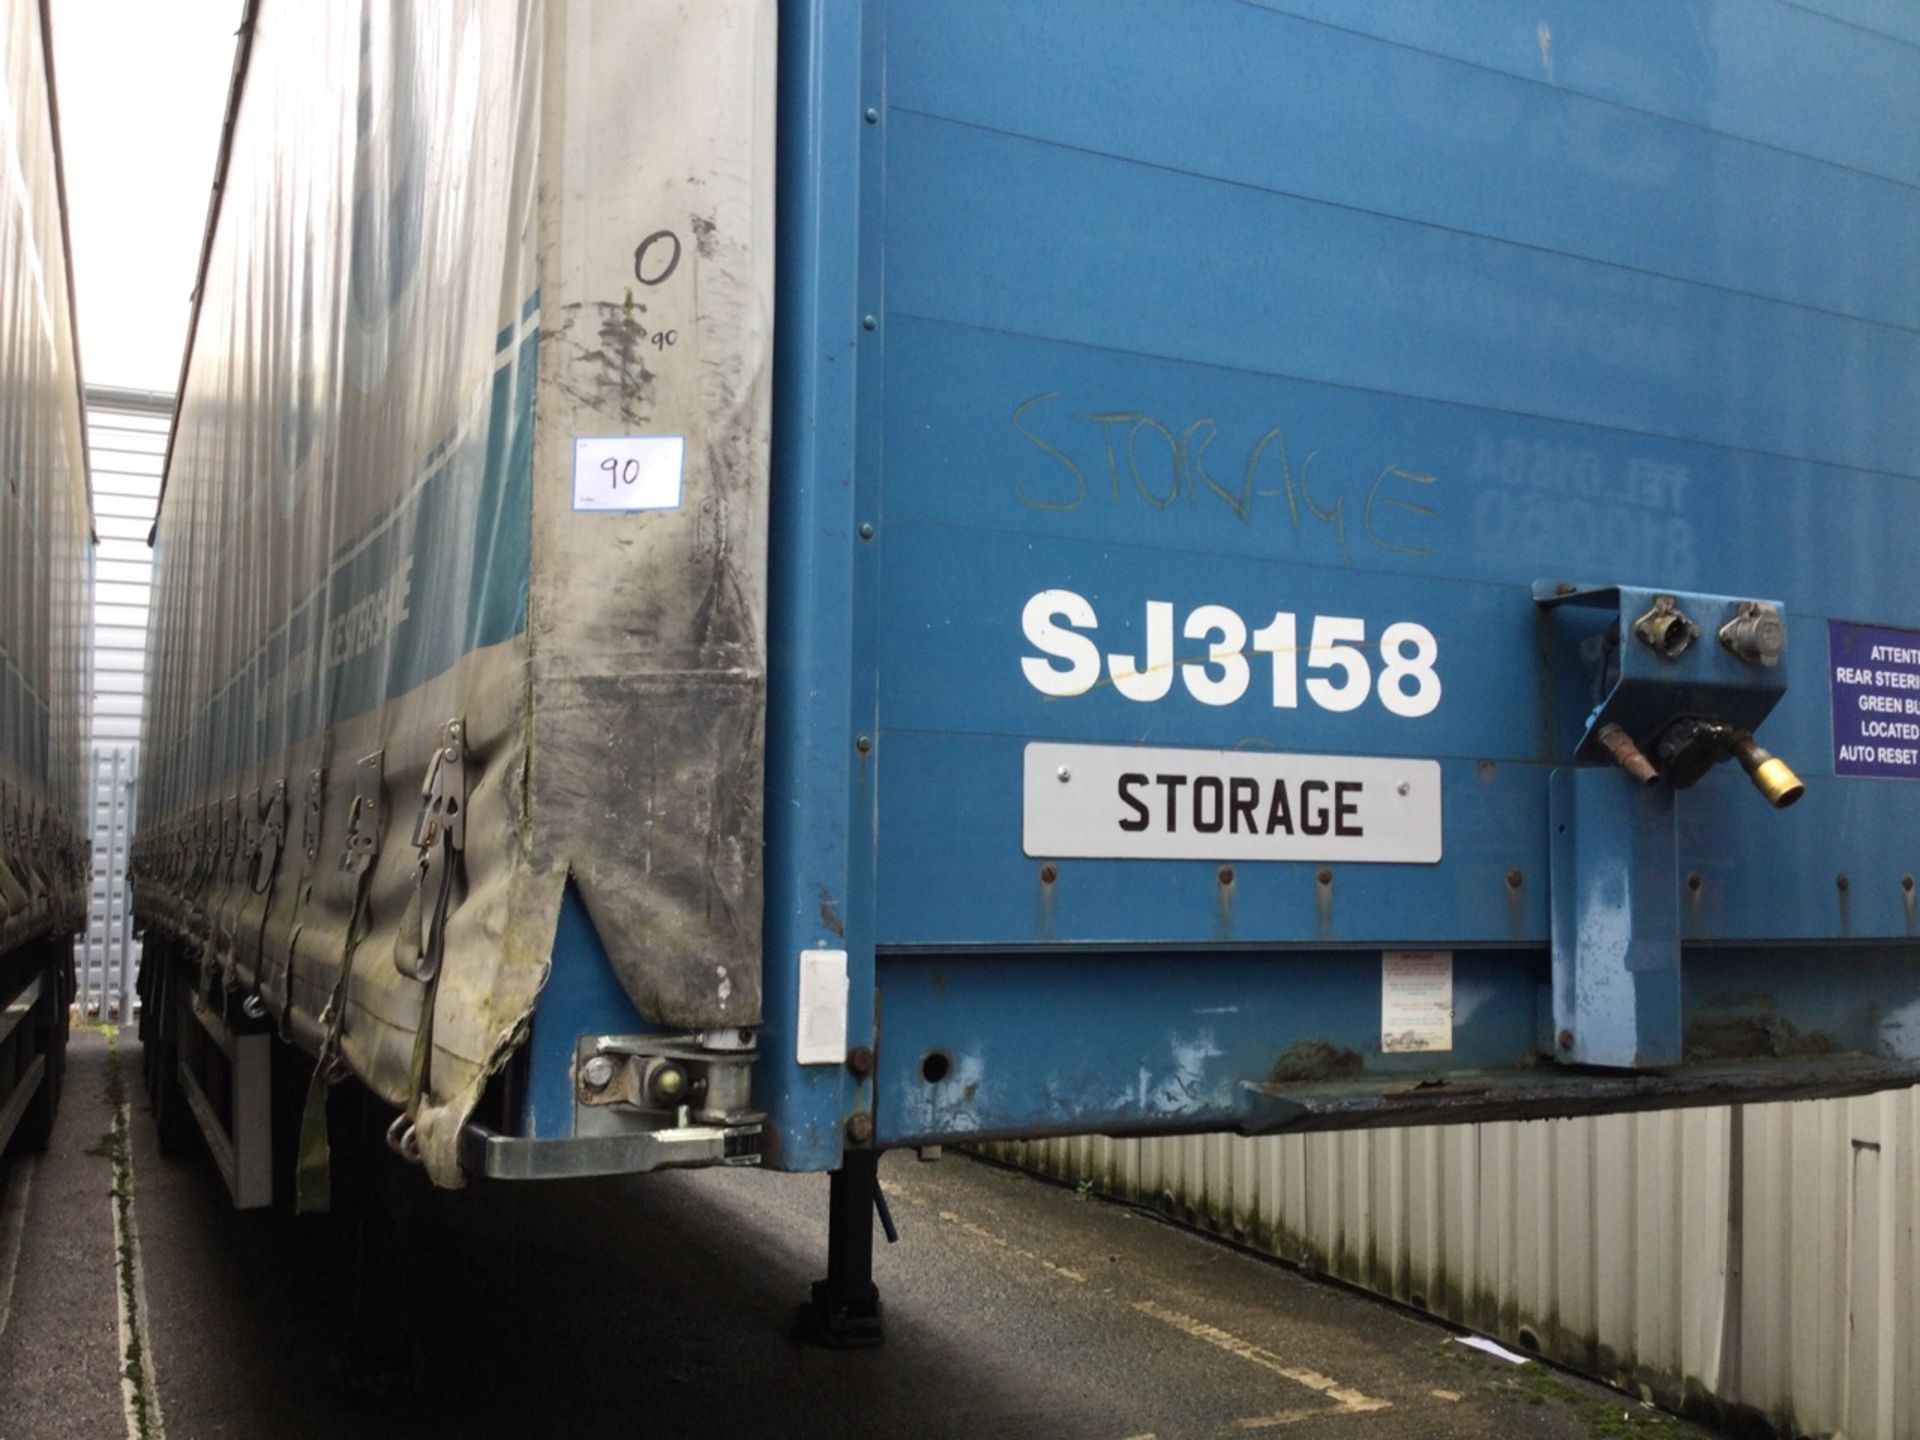 Lawrence David Sdc Tri-Axle Curtainside Trailer Mot Expired , serial number C236623 , year 2006. N